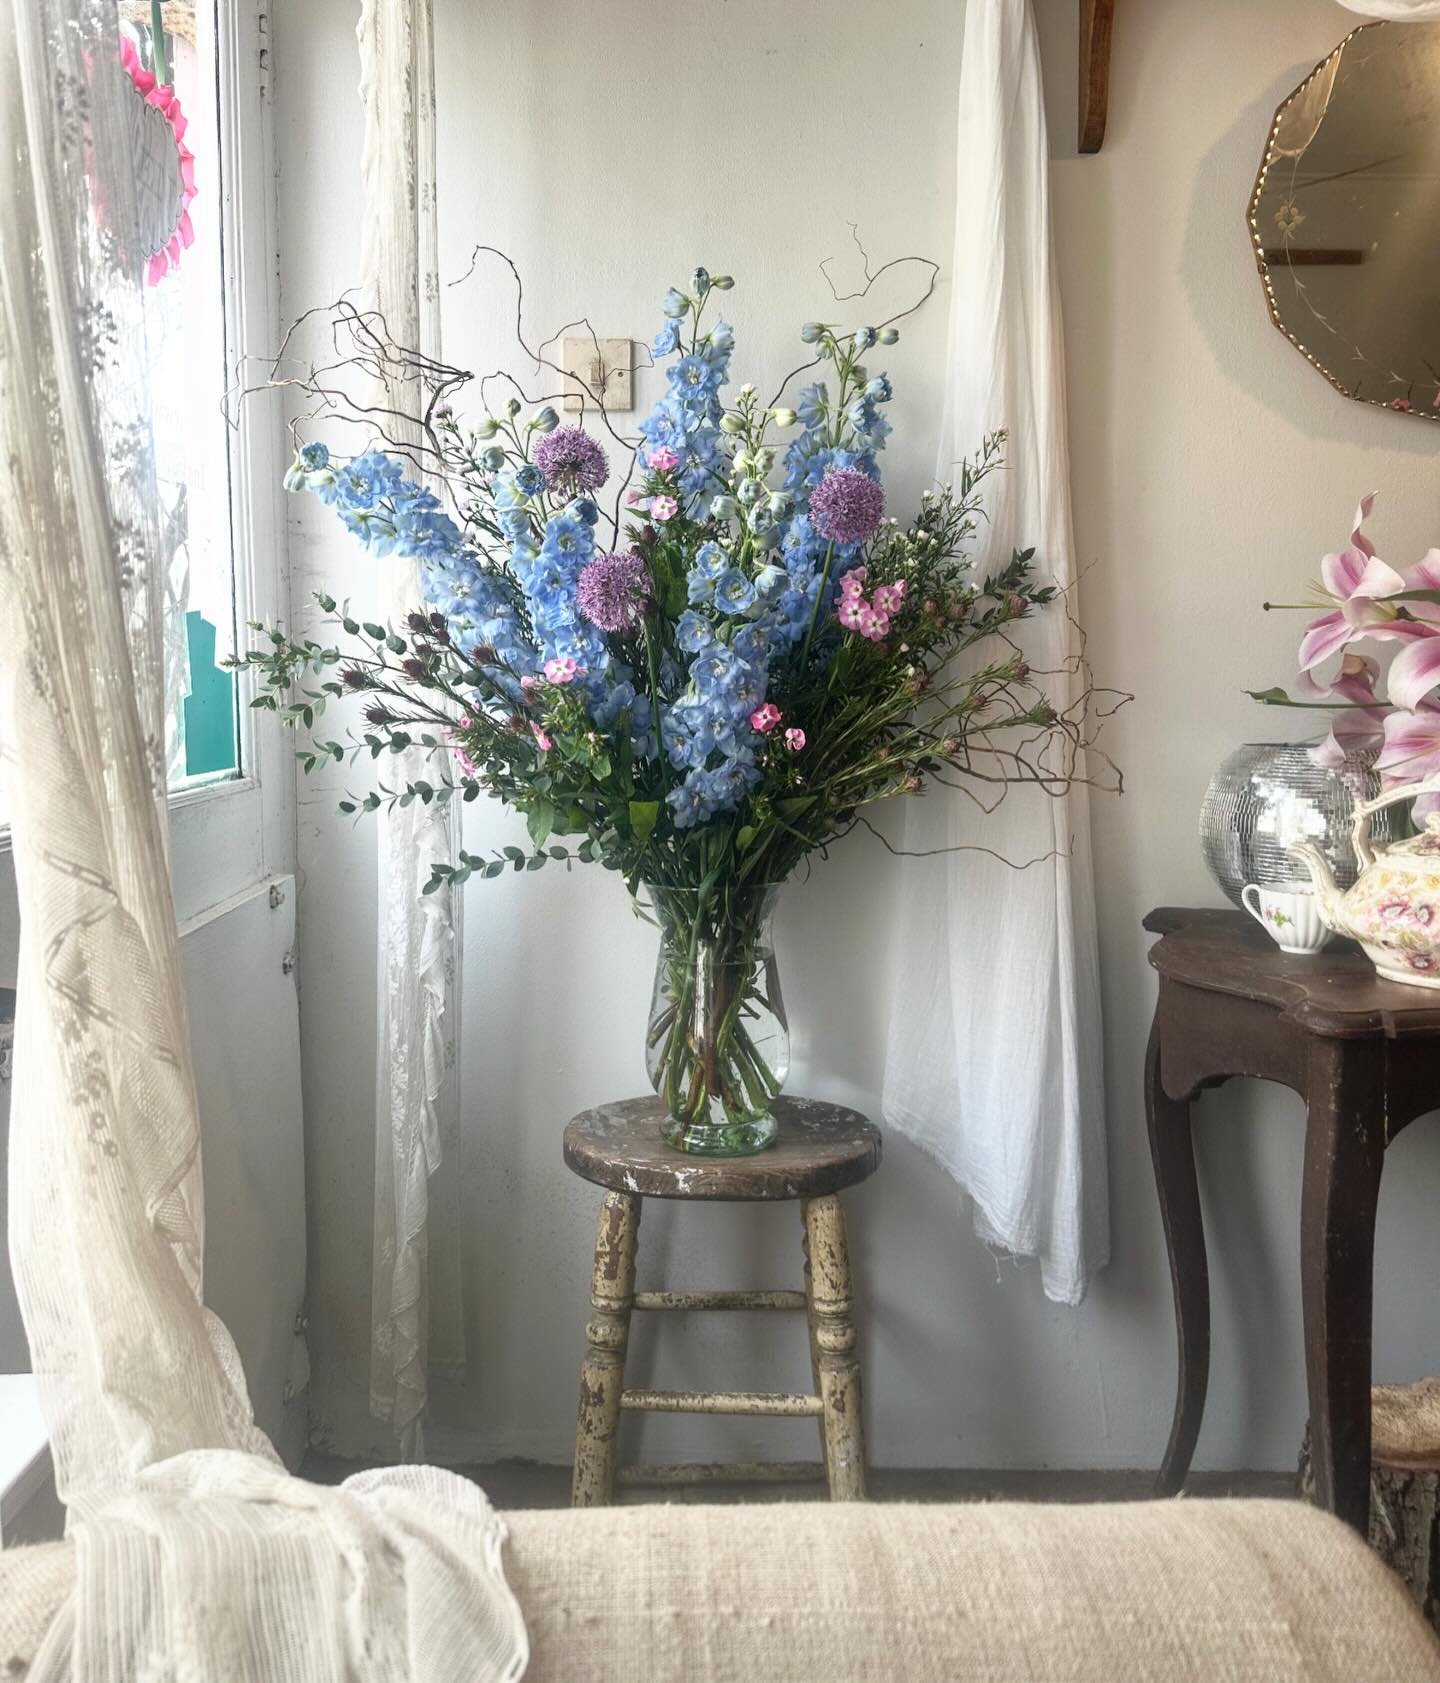 My blue period 💙🦋🌸

Beautiful delphiniums this week for @room5hairdressing display vase 🫶🏼

Dm me @katelangdaleflorist for all floral enquires and commissions 

#bluedelphiniums #blueflowers #vasedisplay #katelangdaleflorist #stylingtheseasons #